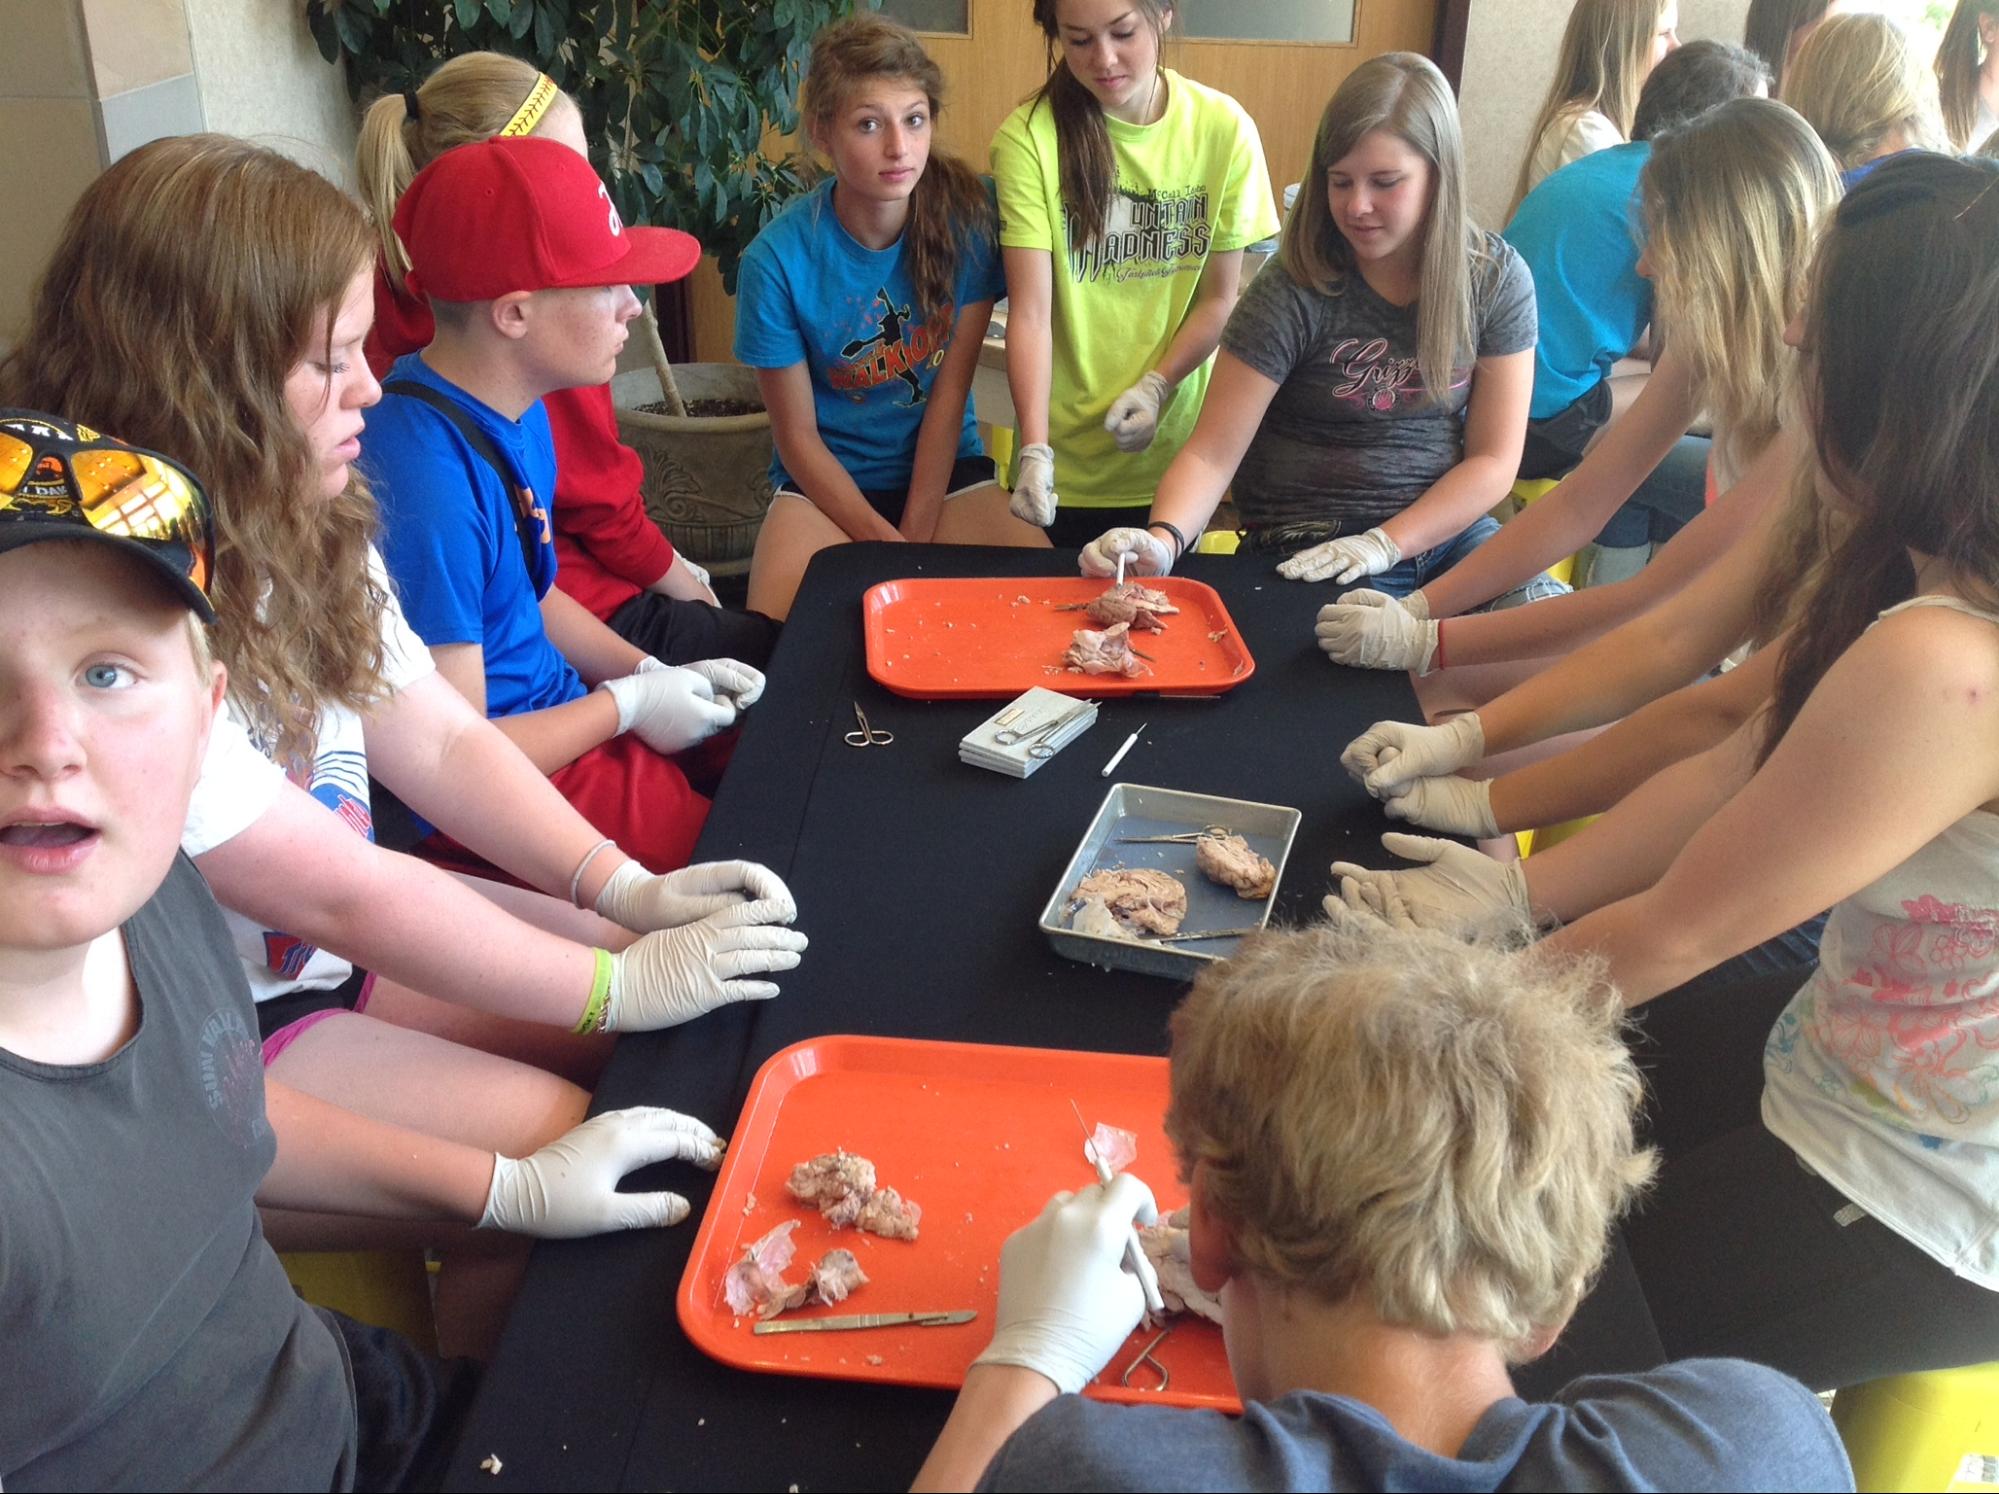 8th grade students gathered around a sheep brain, performing a dissection.